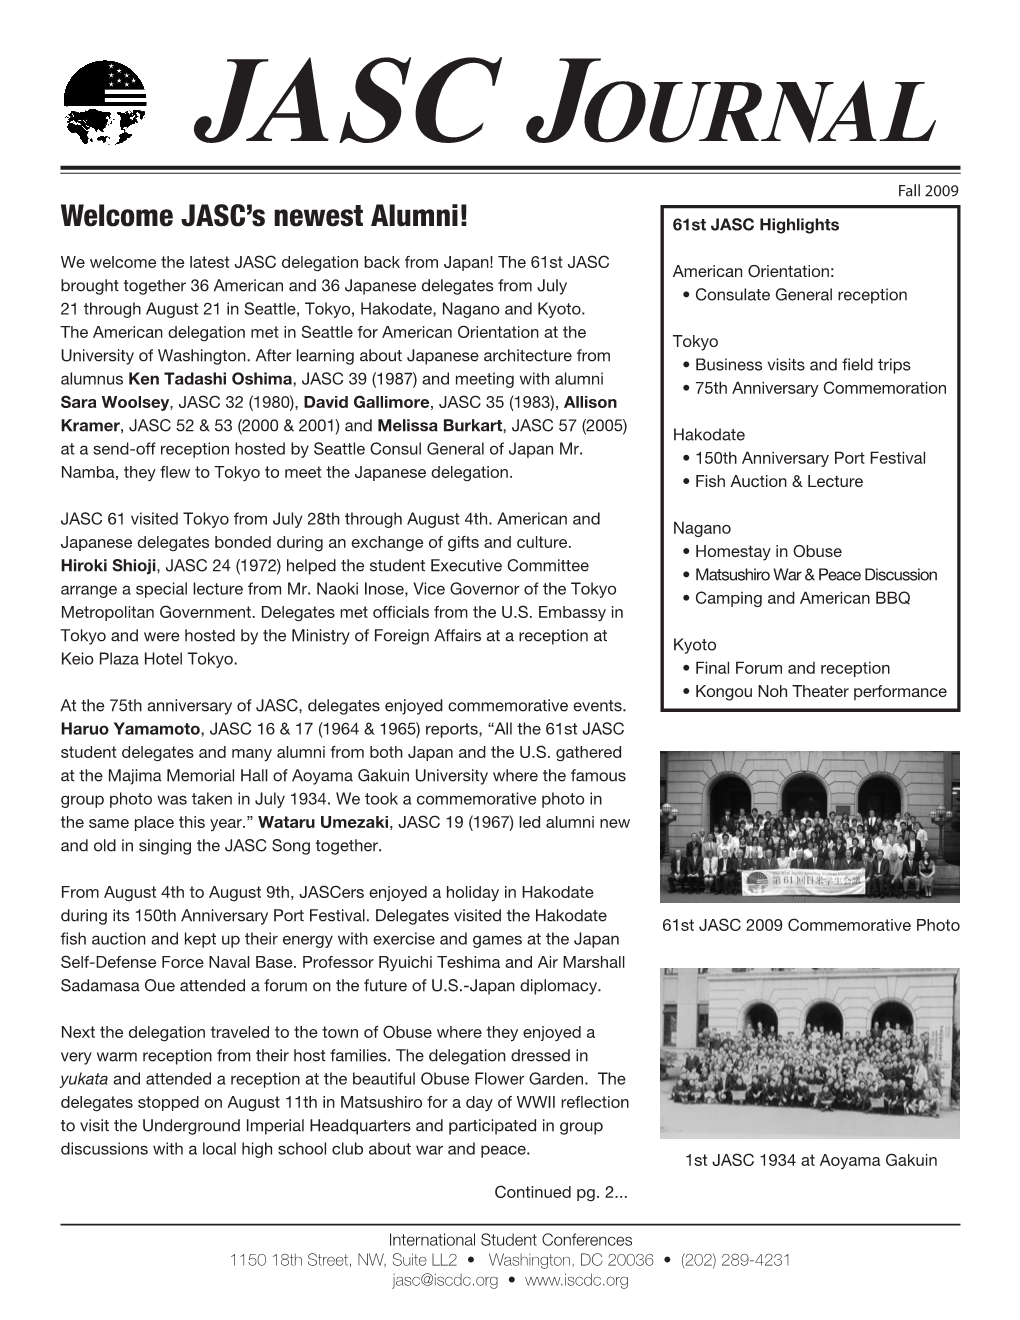 This Link to the Fall 2009 JASC Journal